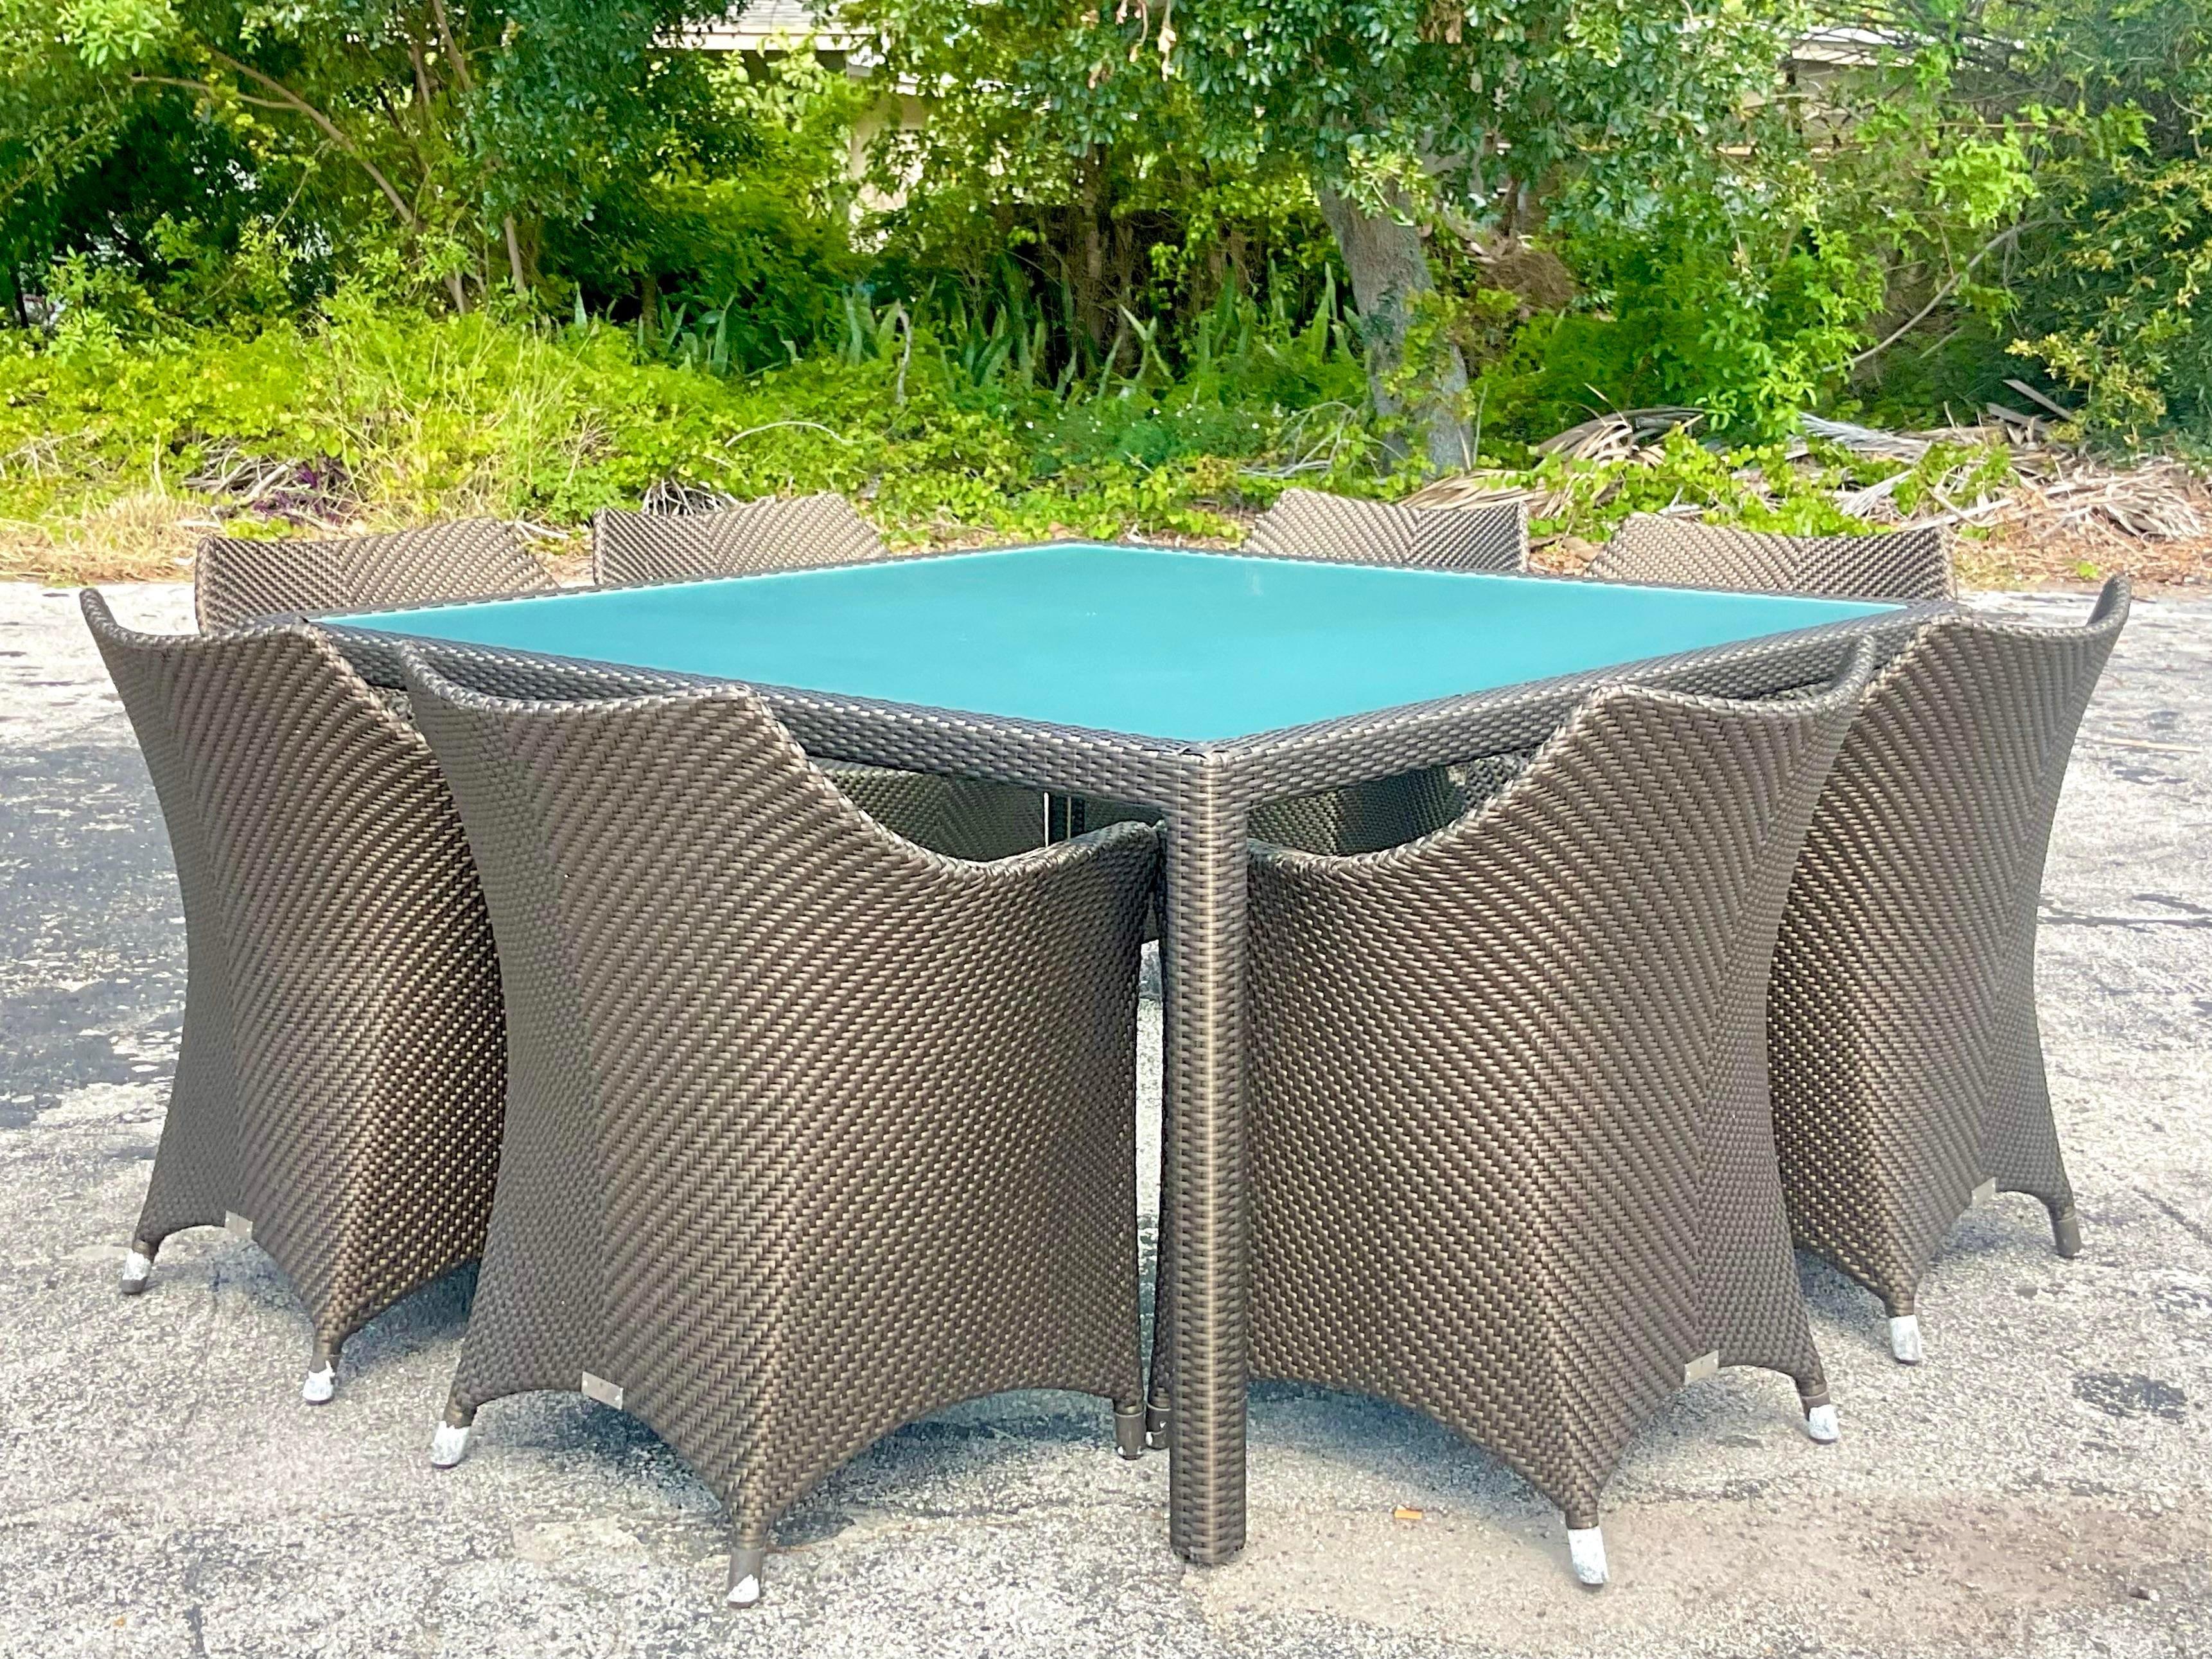 A spectacular set of vintage Coastal Dining table and 8 chairs. Made by the legendary Janus Et Cie and tagged on each chair. The Amari Vita Bronze collection with a very subtle shimmer. Pure luxury. A chic woven resin rattan for extra durability.